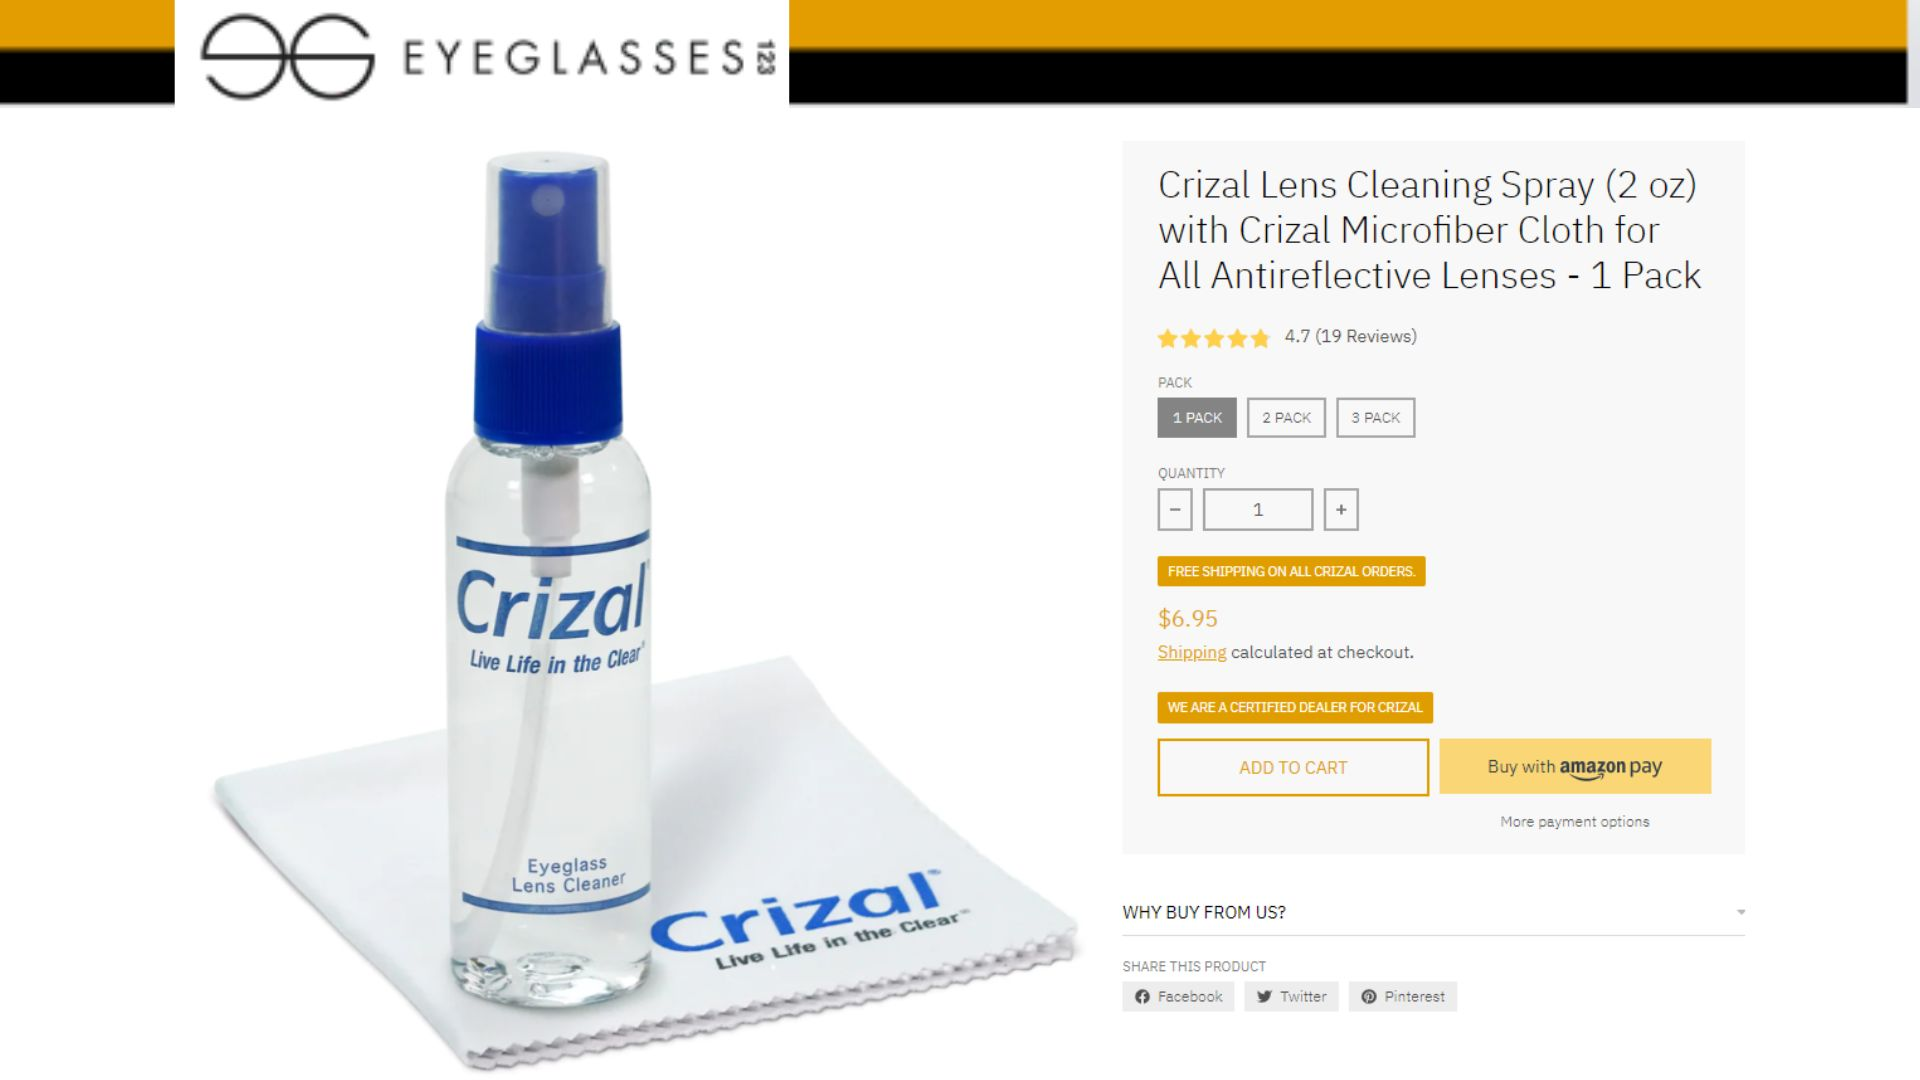 Crizal lens cleaner 2 oz with microfiber cleaning cloth